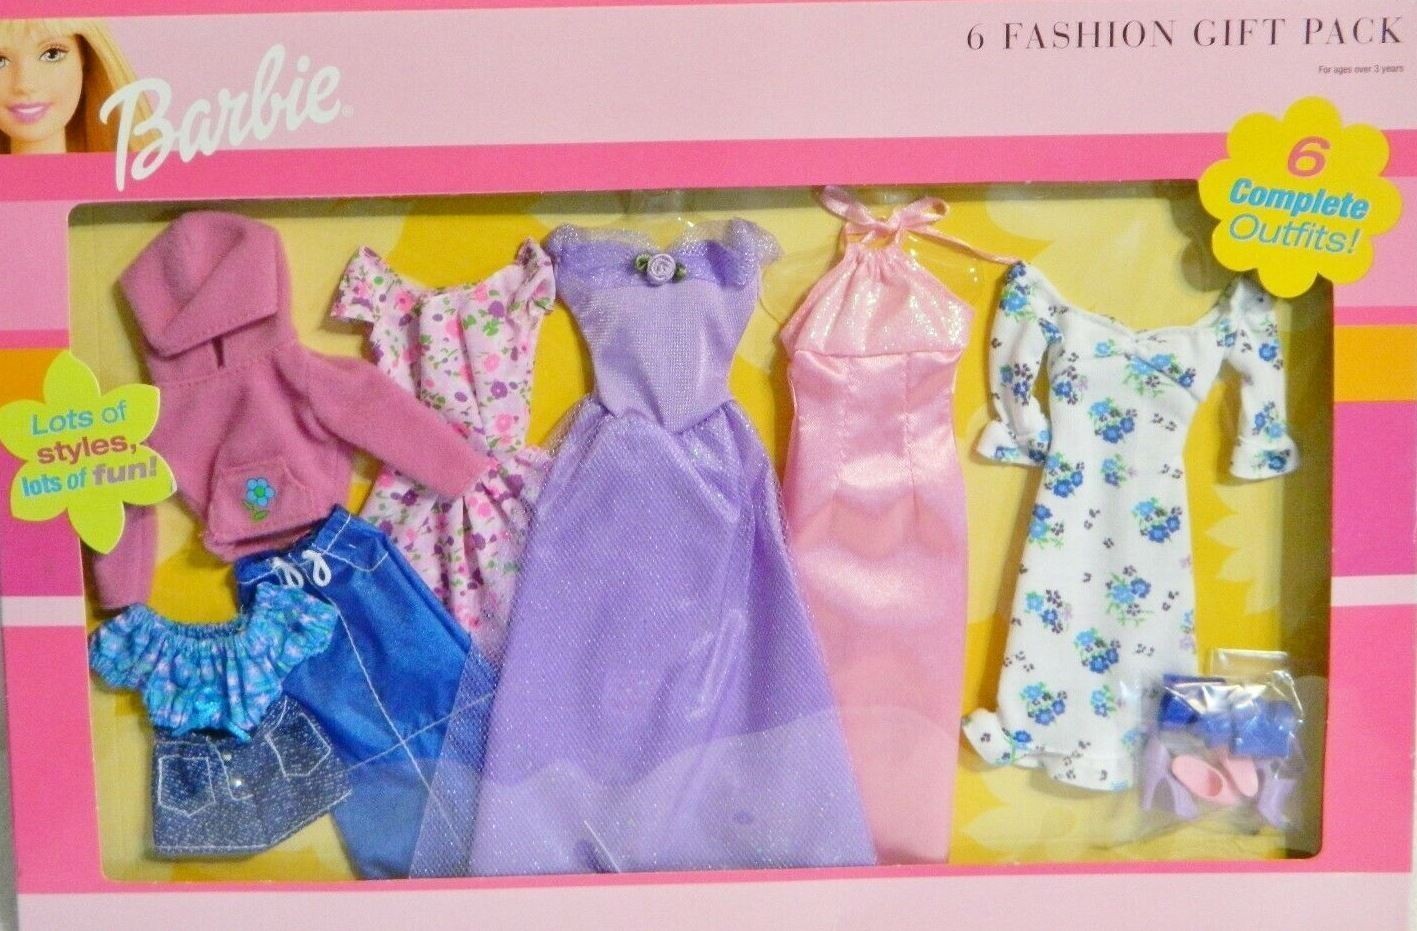 Six Fashion Gift Pack – Barbie Reference